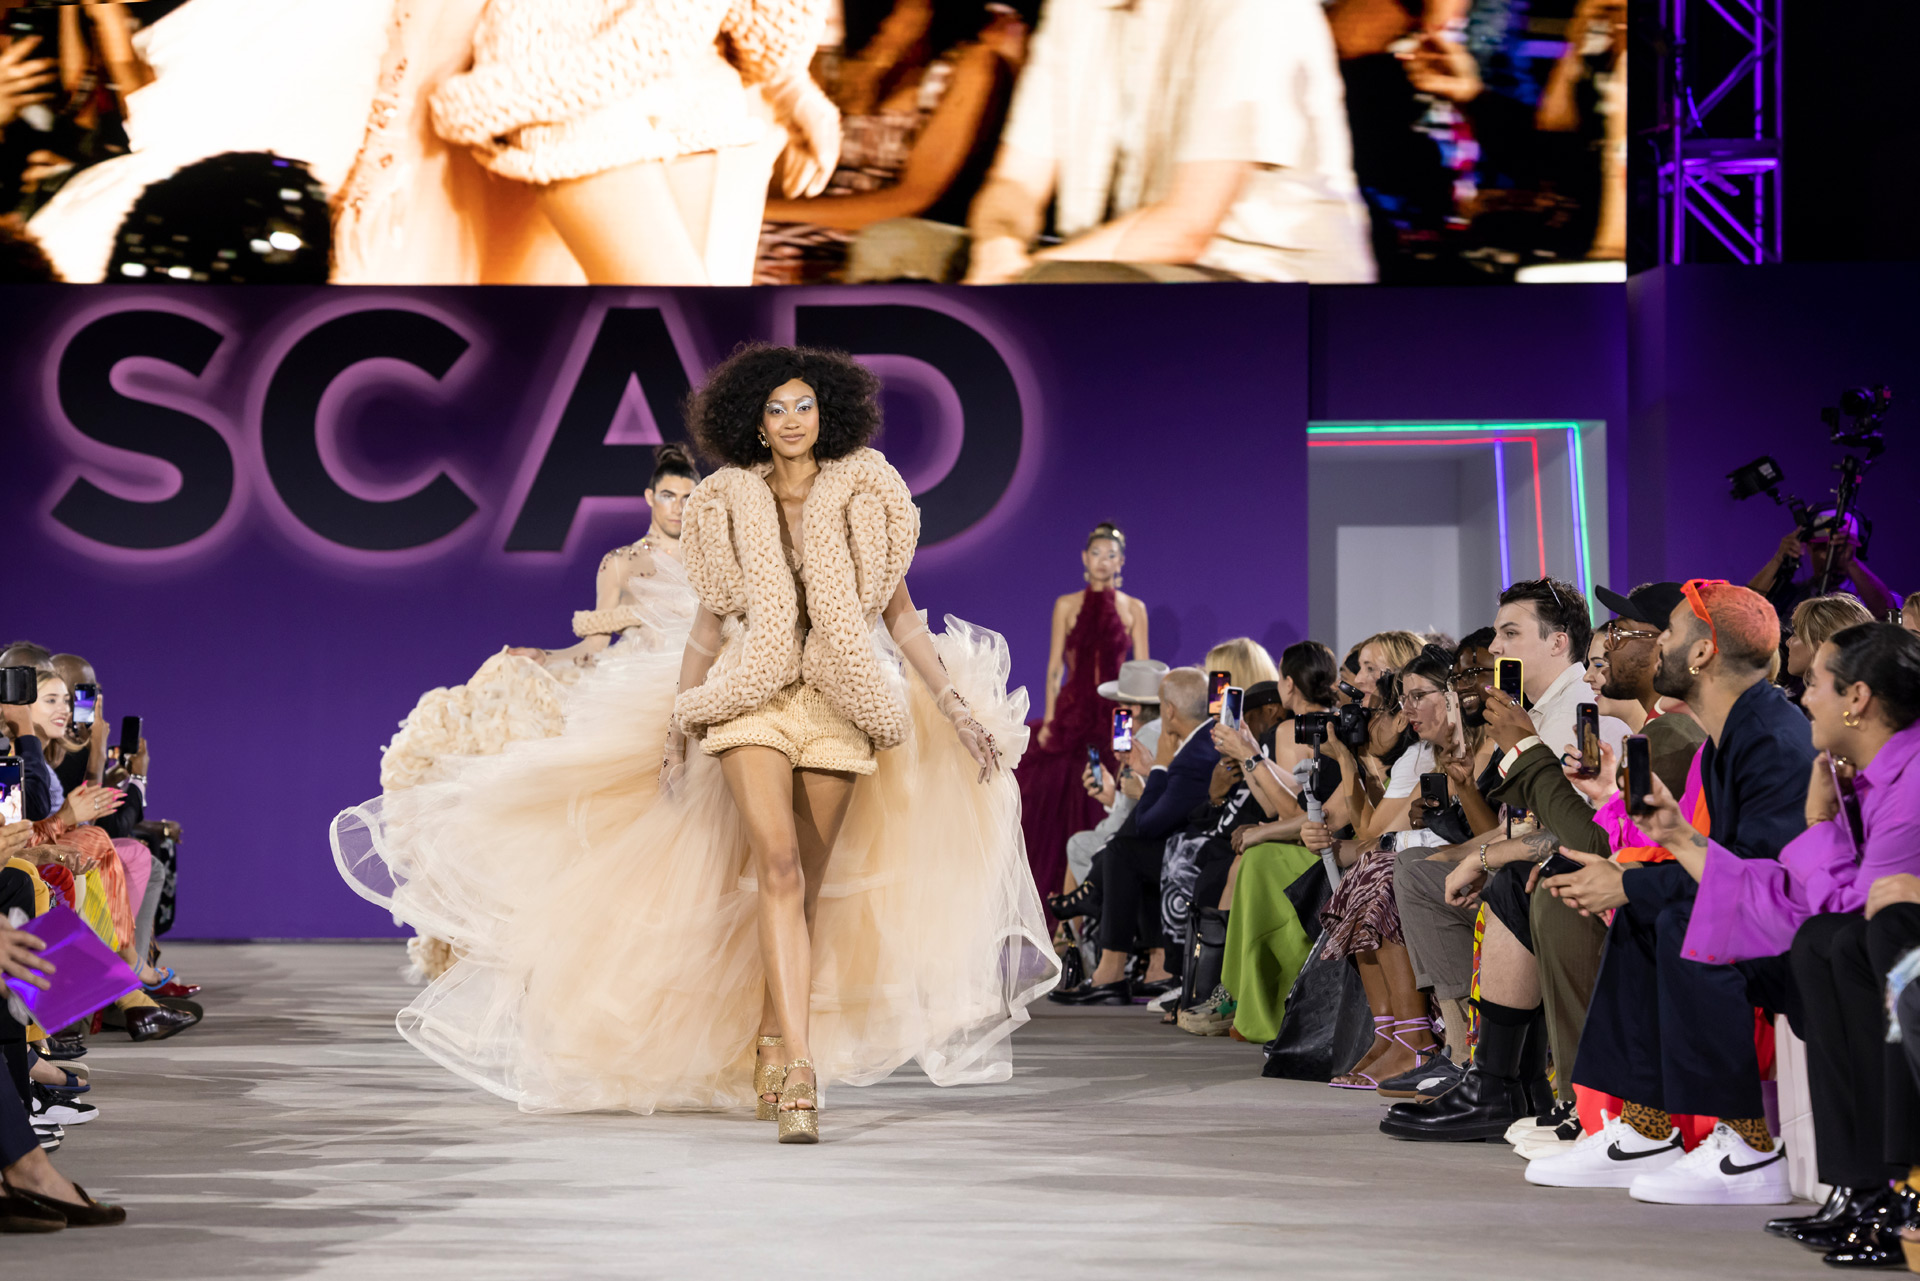 SCAD earns two new top distinctions with Fashion Schools in 2022